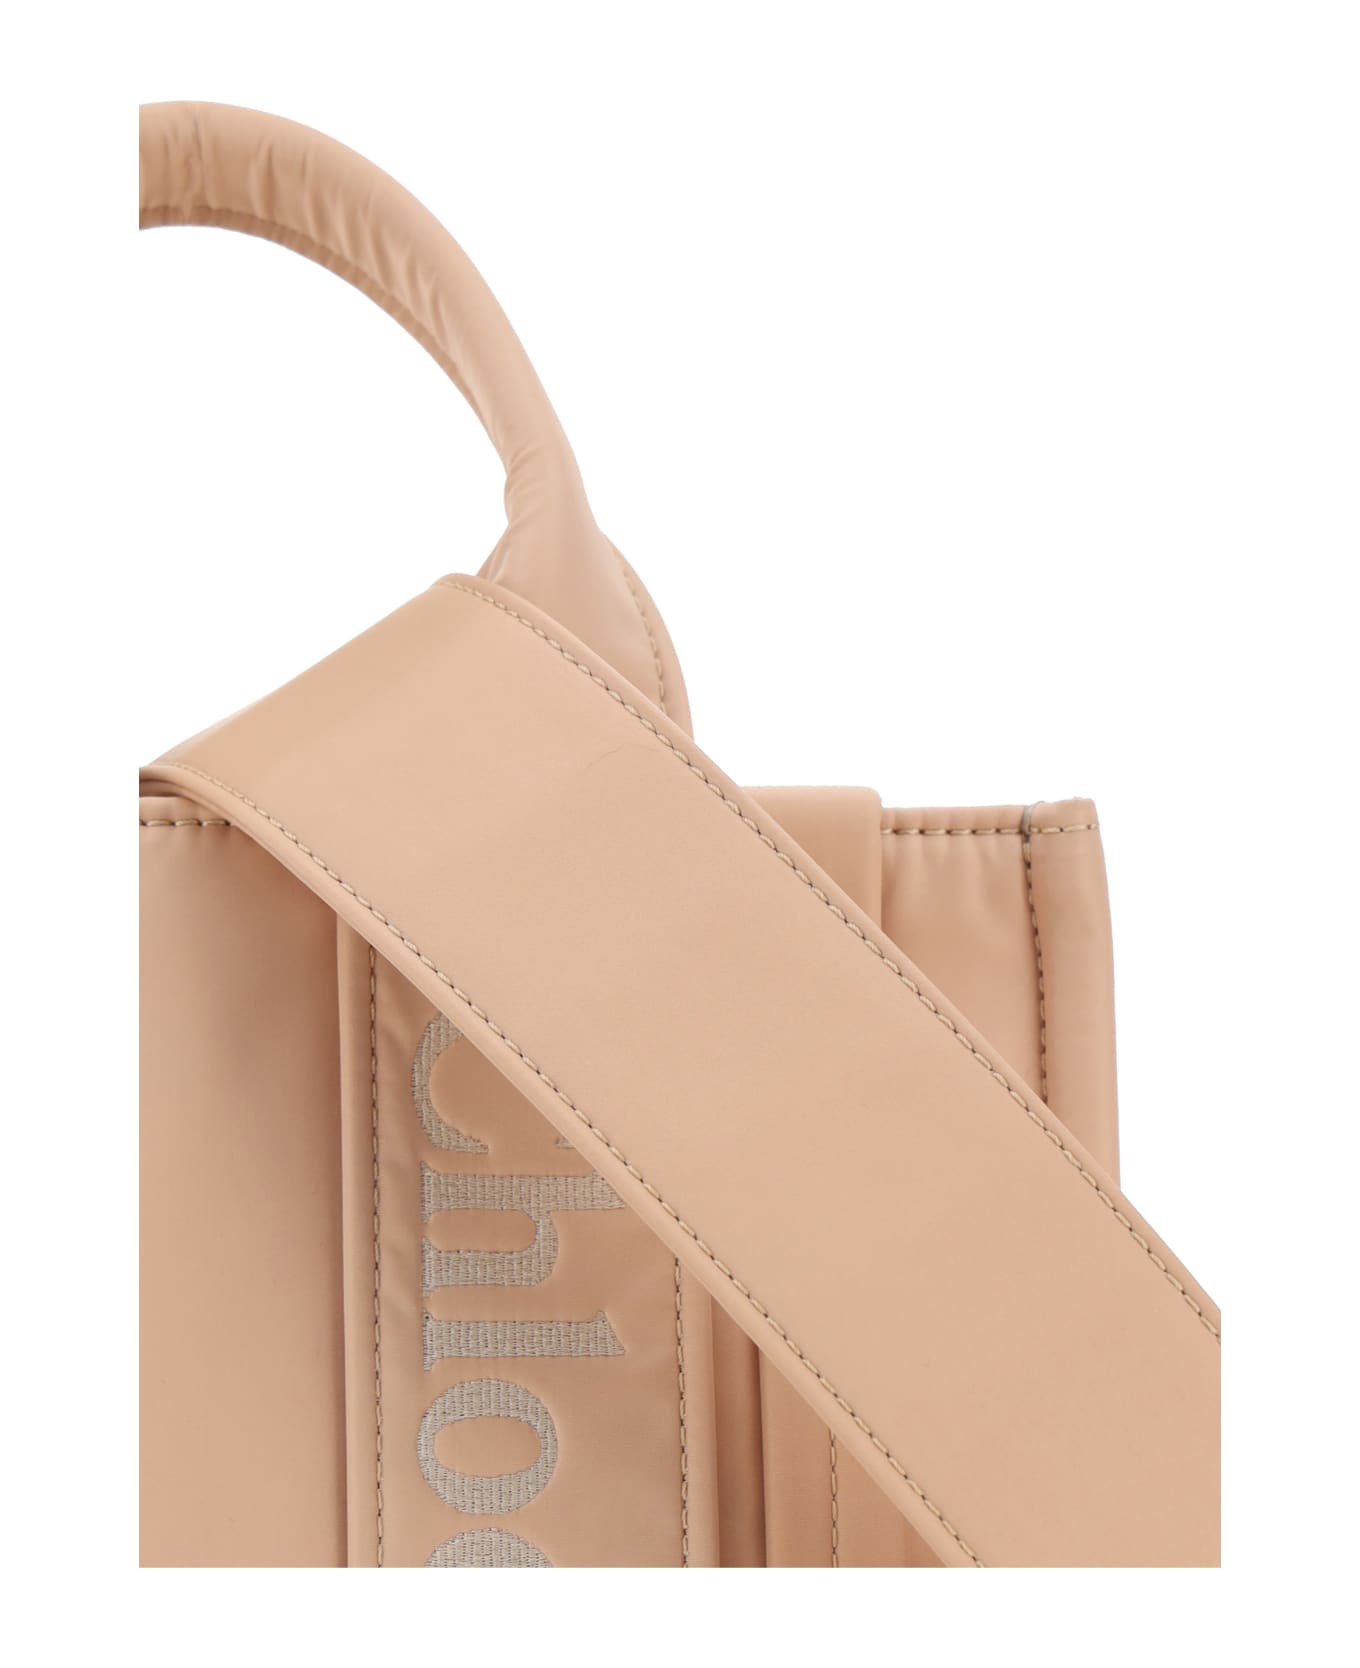 Chloé Woody Logo Embroidered Tote Bag - Rose Dust